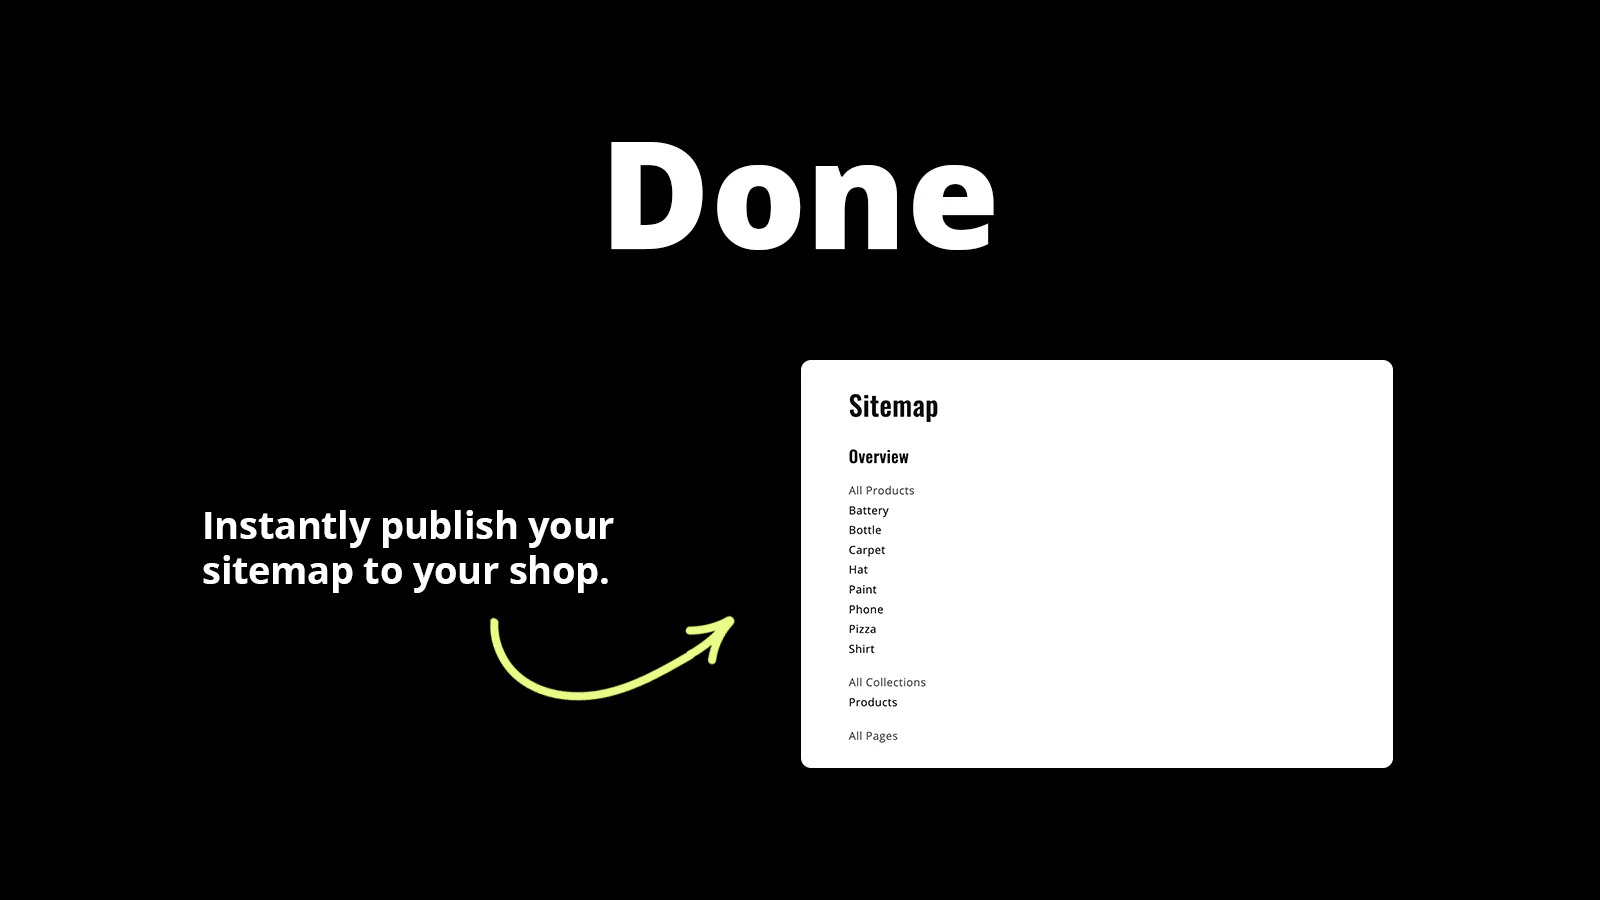 Done. Instantly publish your sitemap to your shop.